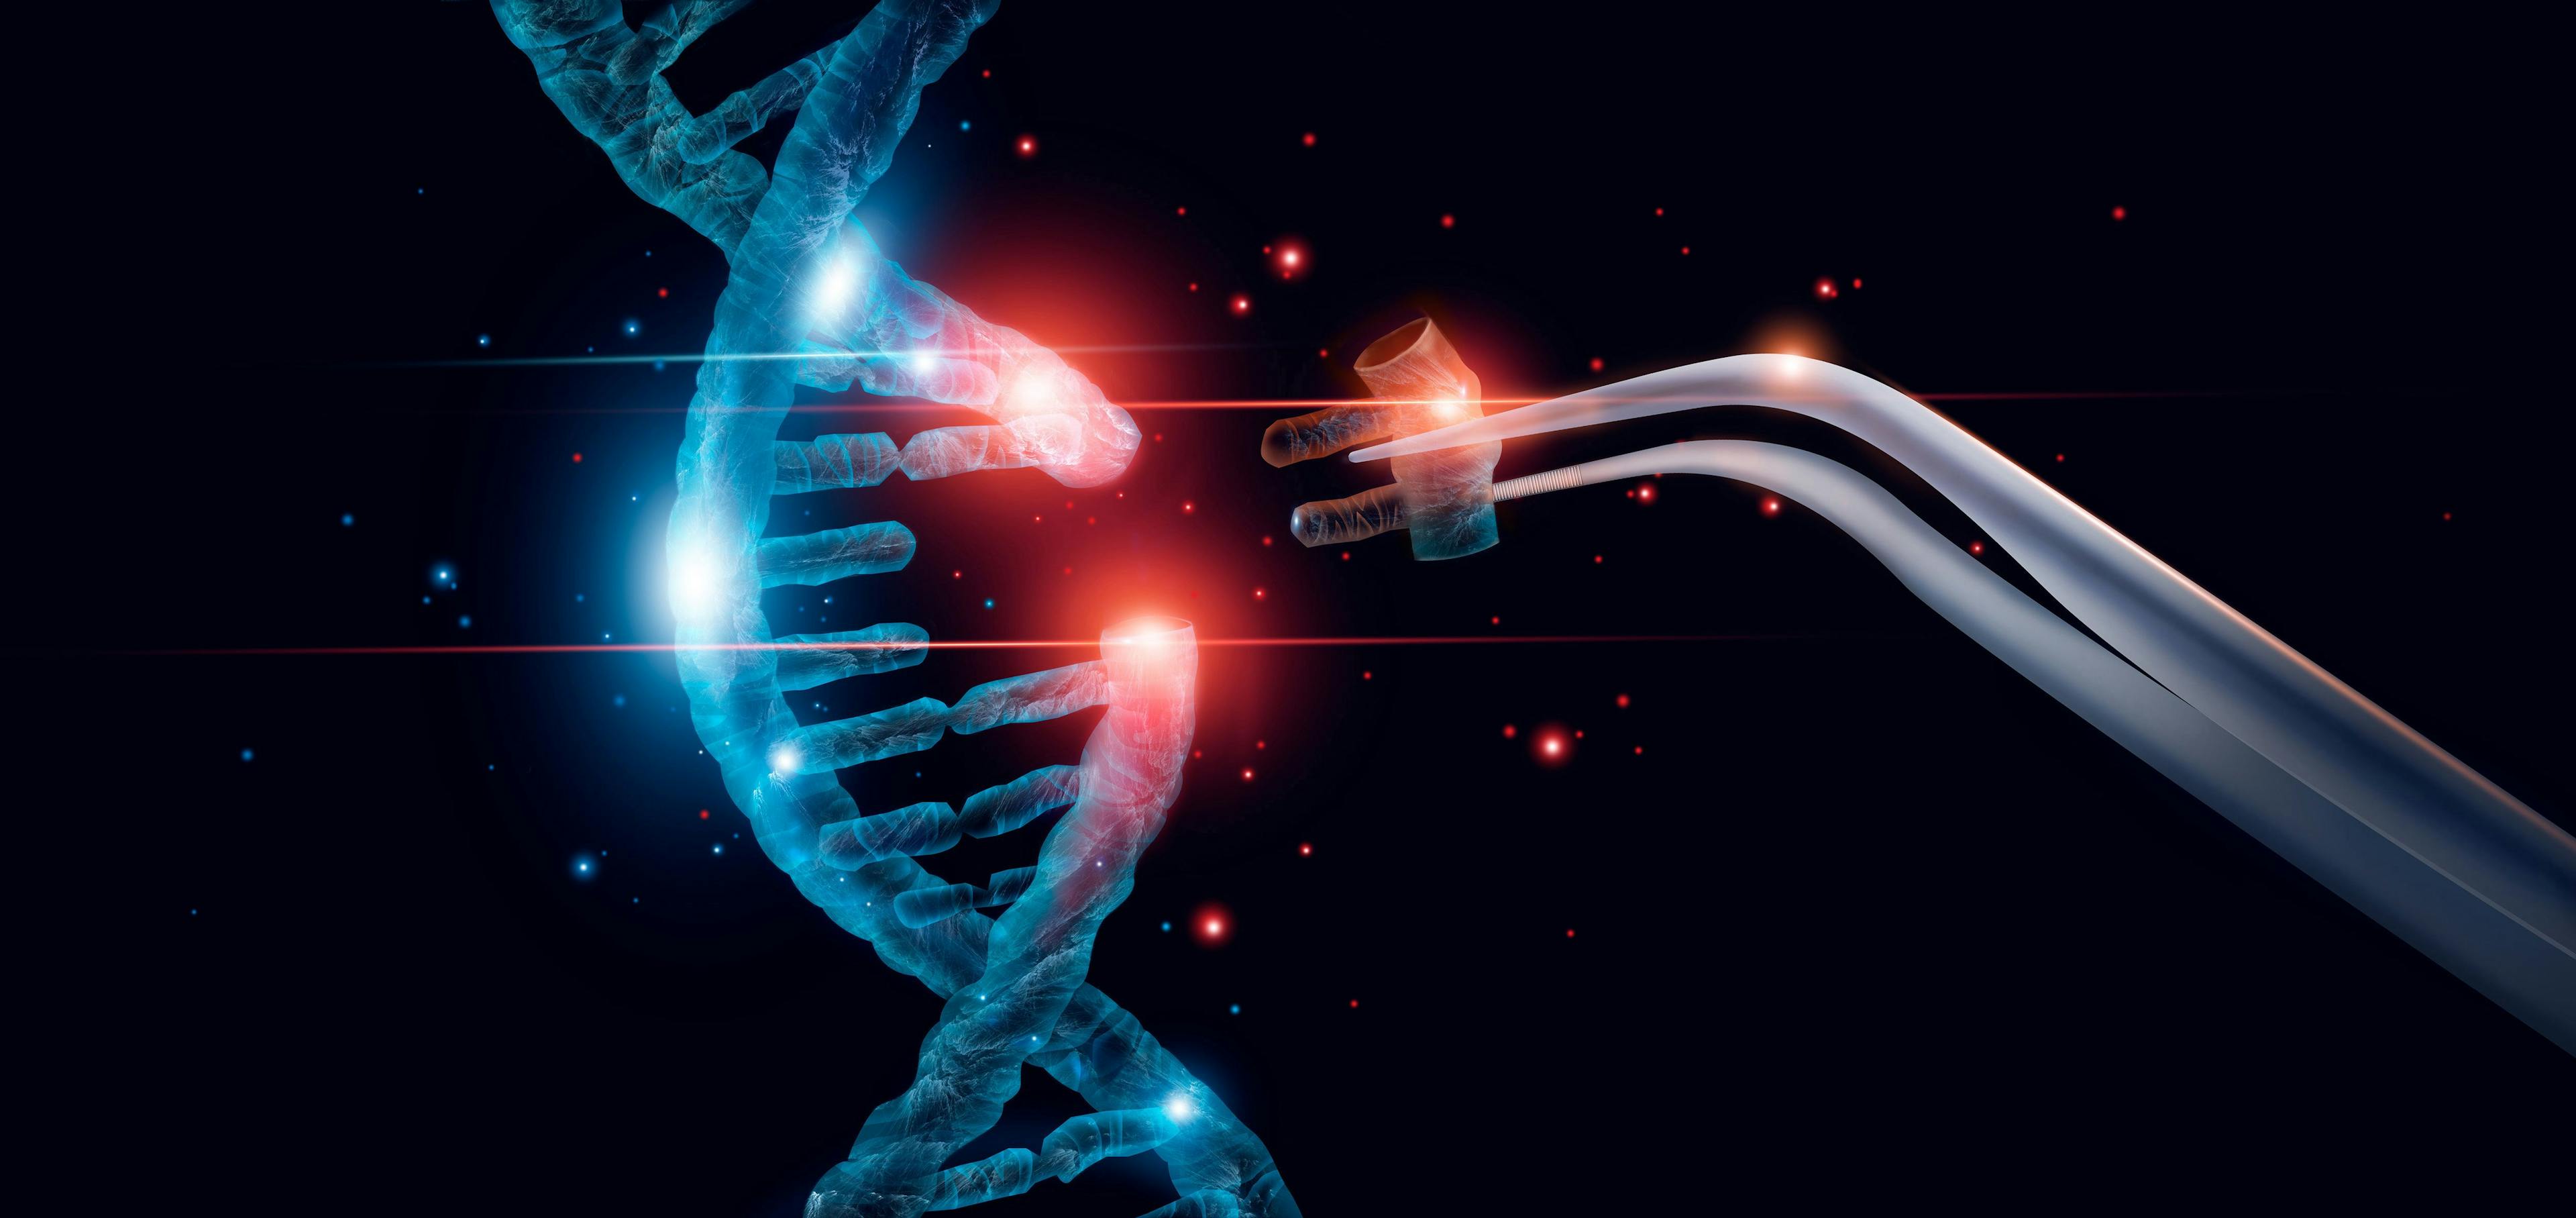 Onasemnogene abeparvovec is a gene therapy approved in the last decade for SMA | image credit: ipopba - stock.adobe.com